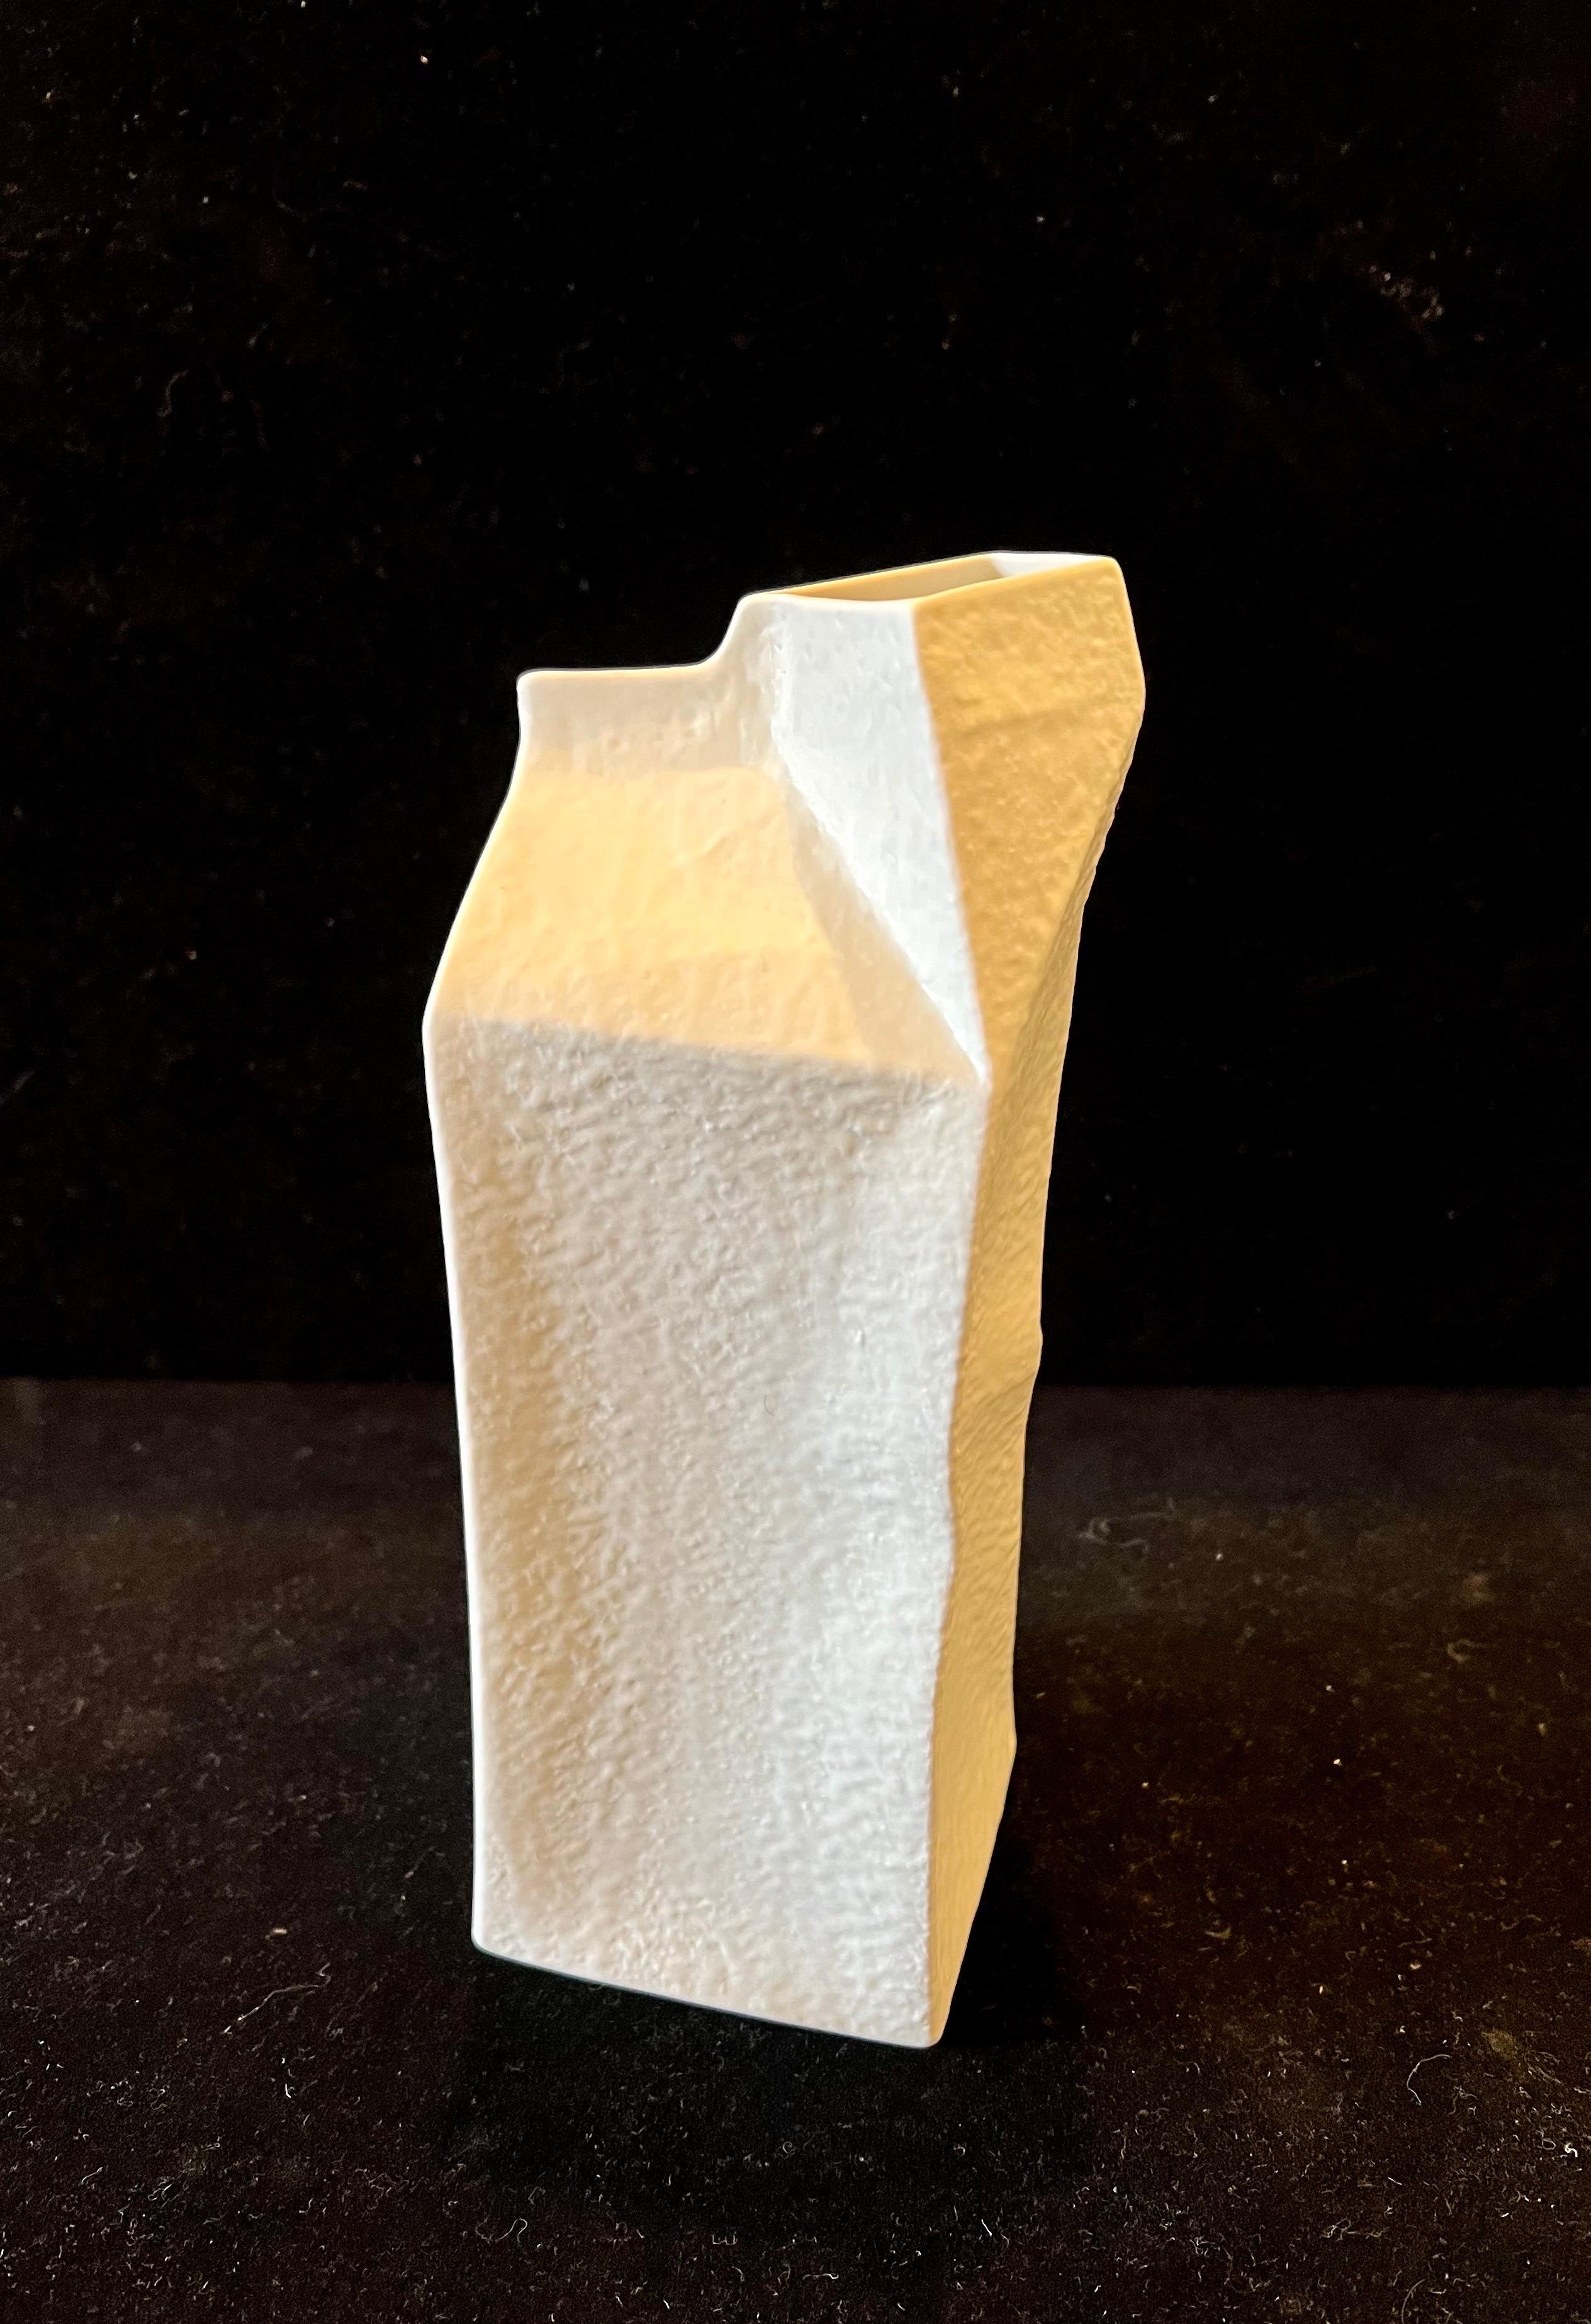 Very cool bisque textured porcelain finish vase can be used for kitchen as a pitcher or as a flower vase, its great design and example of POP art.